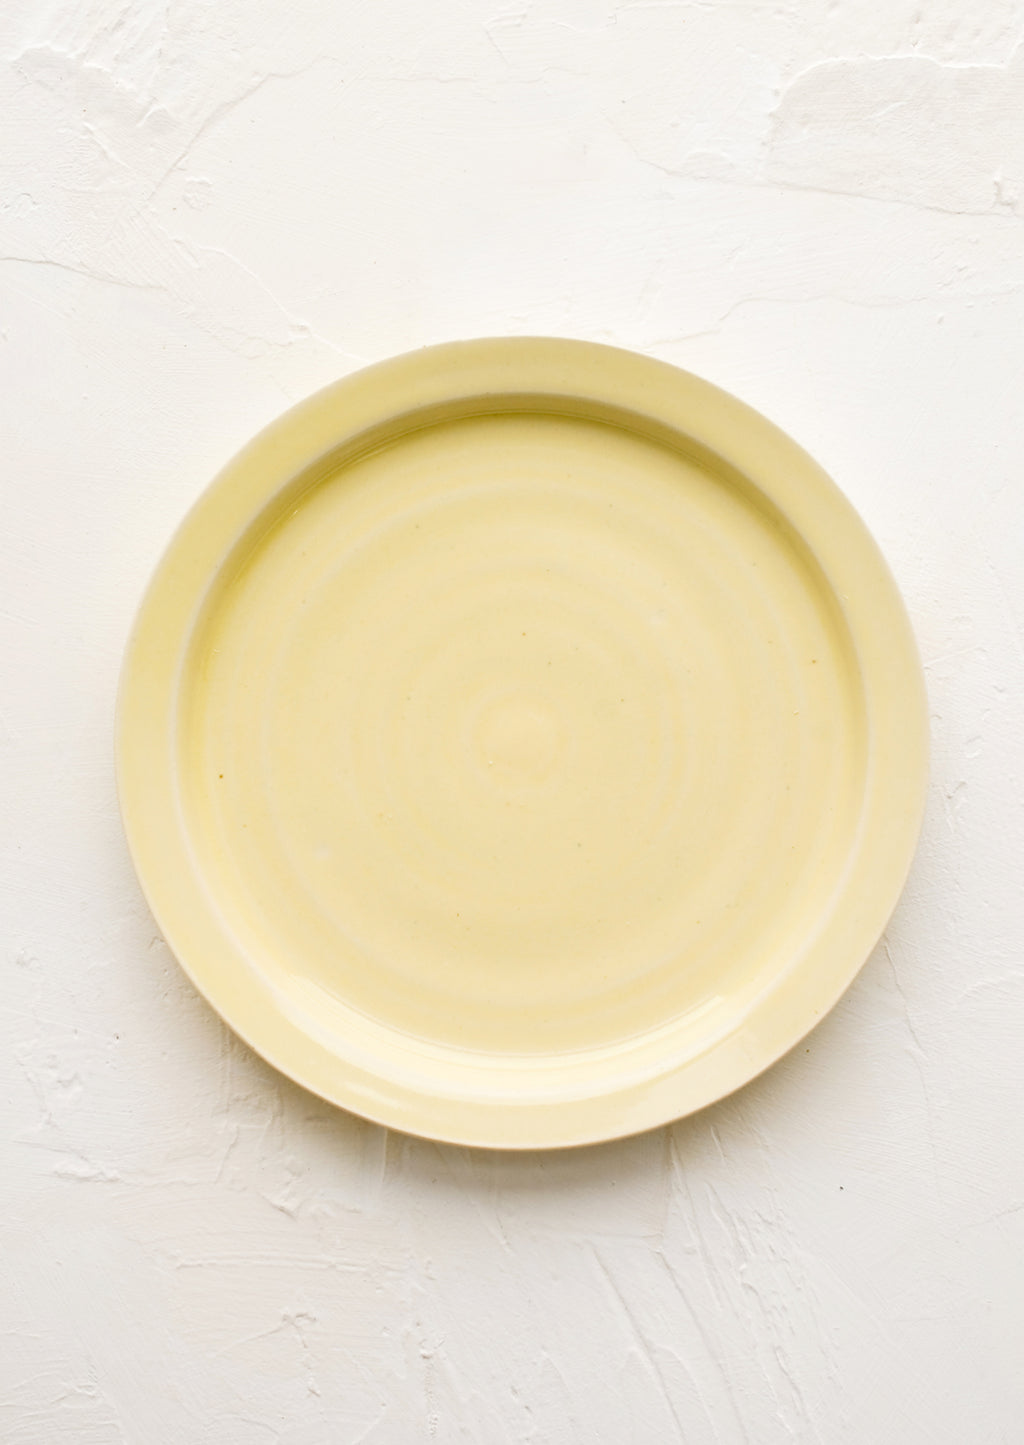 Butter (Glossy): A ceramic side plate in glossy butter yellow glaze.